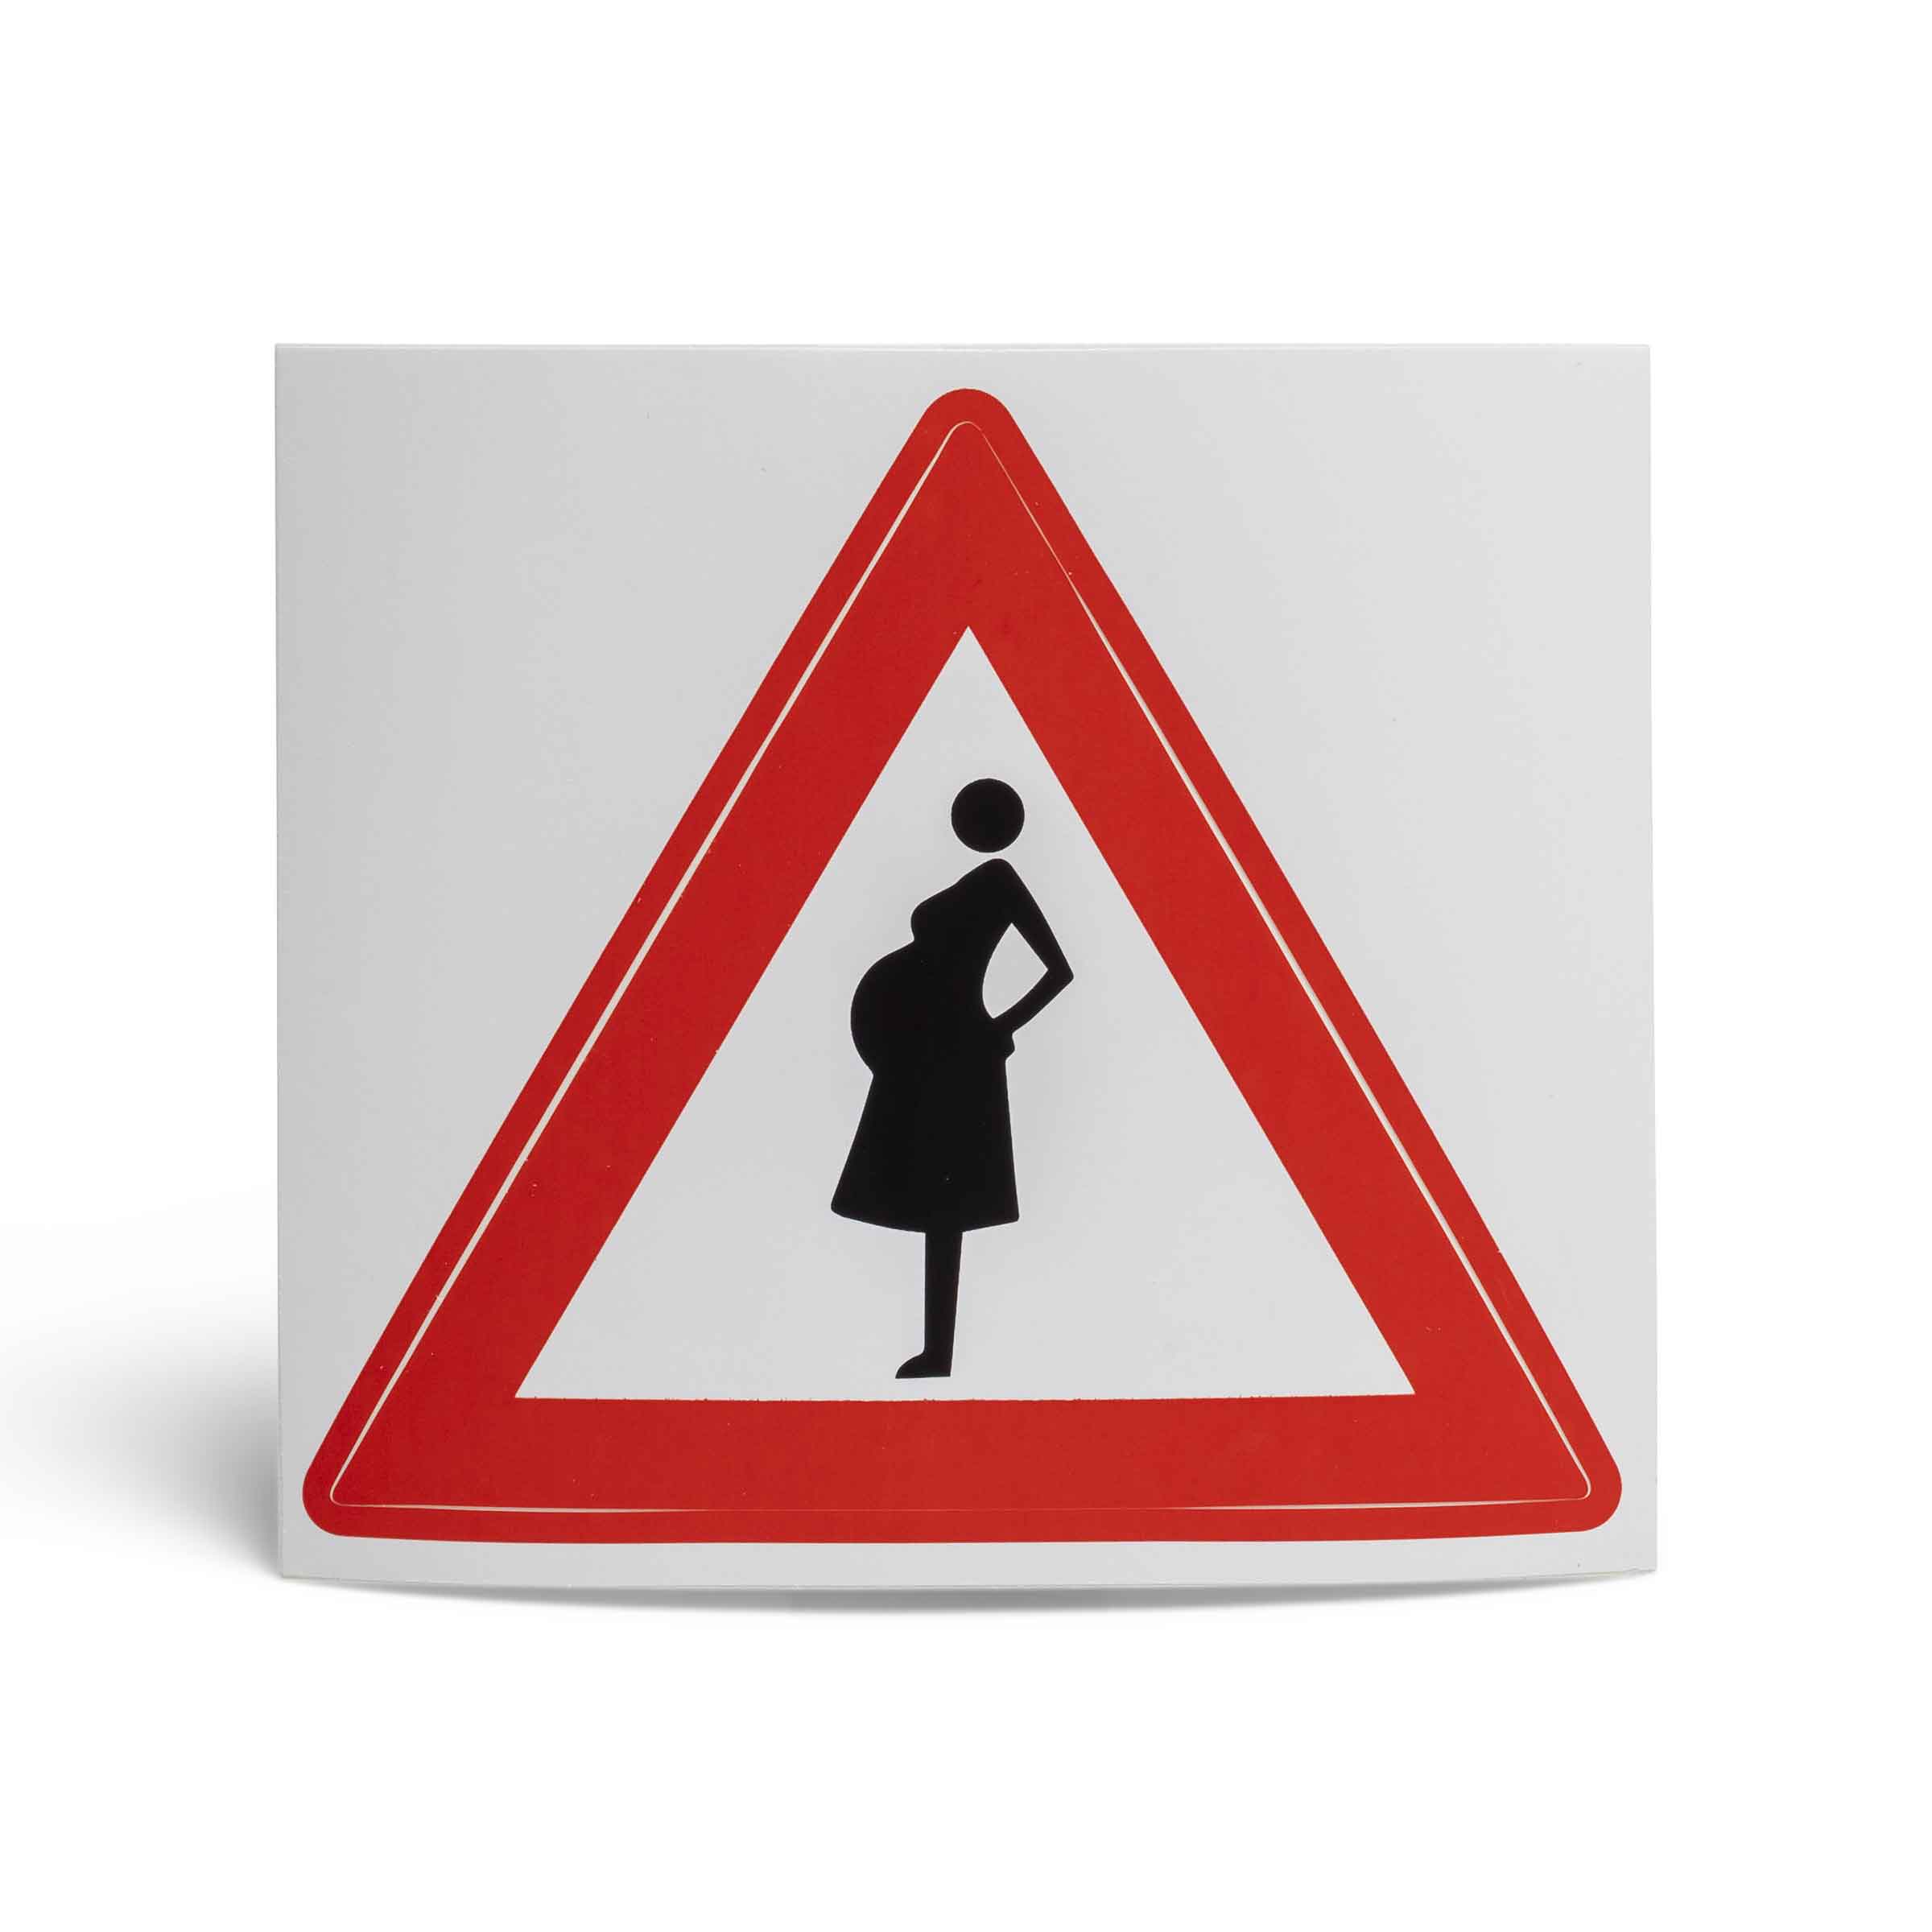 Stickers with pregnancy warning